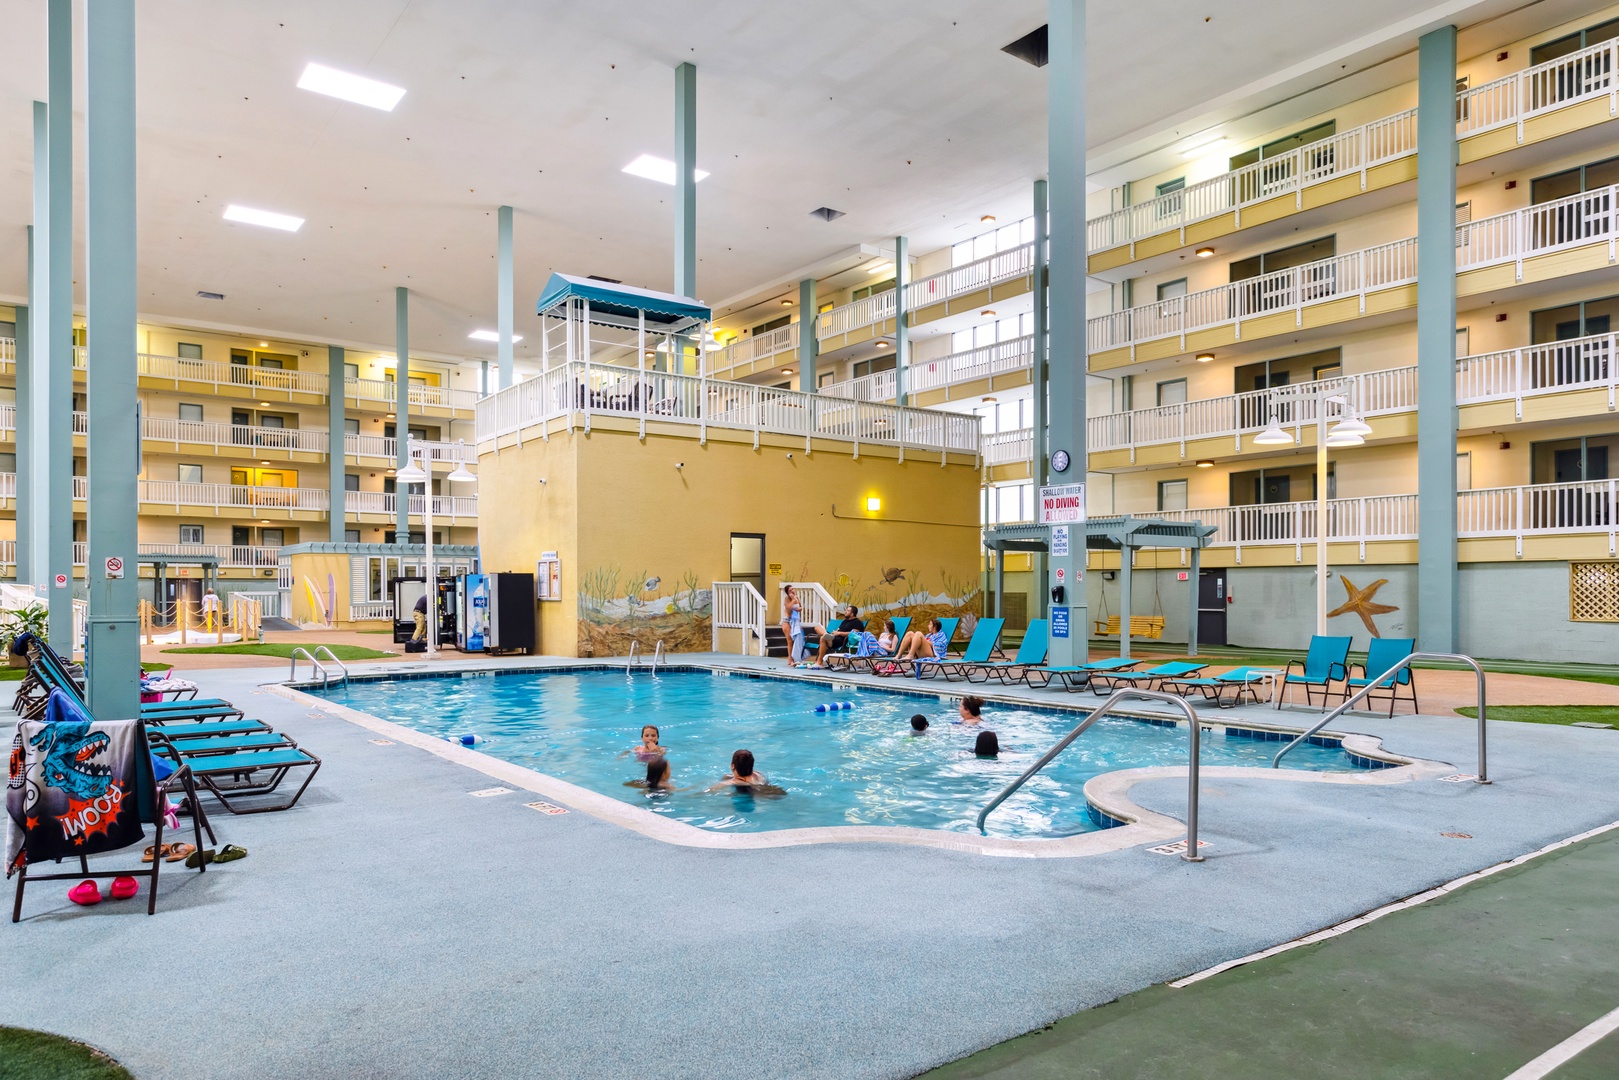 Enjoy the fabulous community amenities at your fingertips during your stay